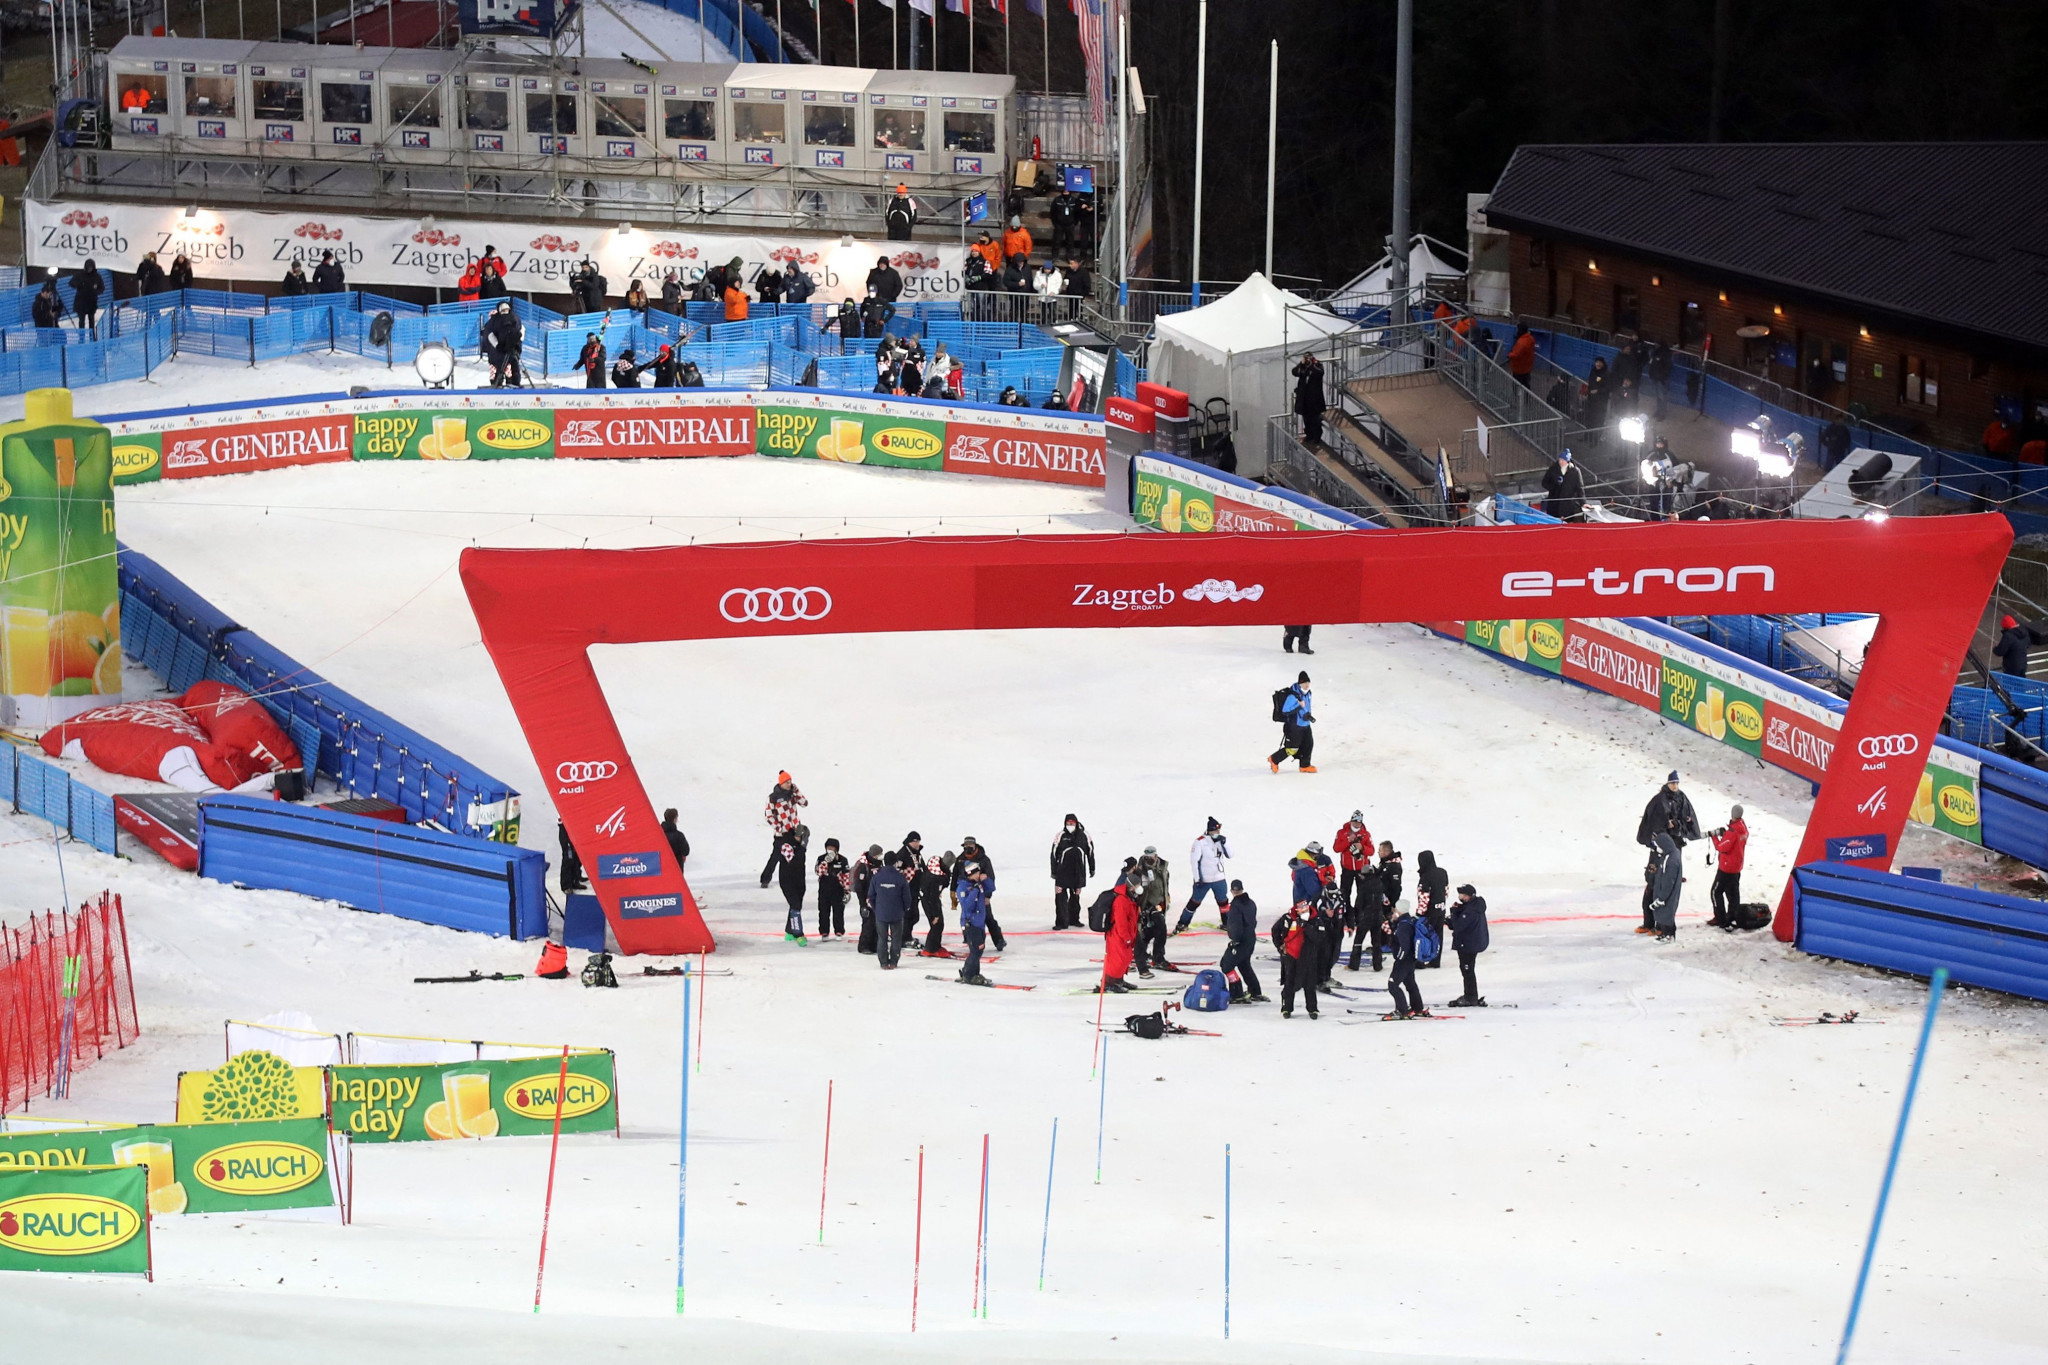 Bad weather dashes efforts to stage men's Zagreb FIS Alpine Ski World Cup event